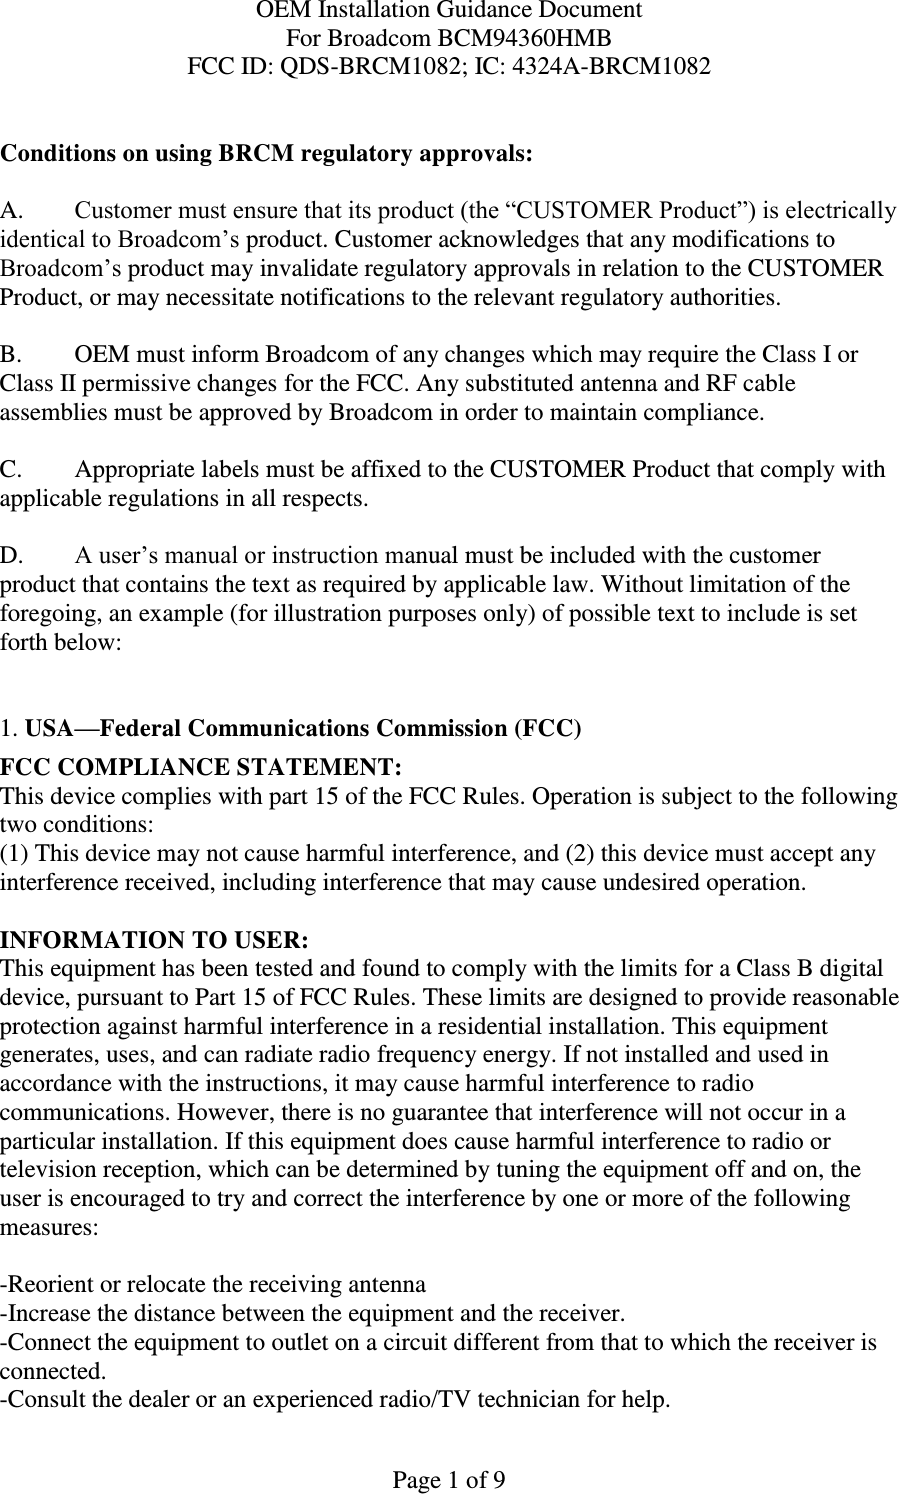 OEM Installation Guidance Document For Broadcom BCM94360HMB FCC ID: QDS-BRCM1082; IC: 4324A-BRCM1082  Page 1 of 9  Conditions on using BRCM regulatory approvals:   A. Customer must ensure that its product (the “CUSTOMER Product”) is electrically identical to Broadcom’s product. Customer acknowledges that any modifications to Broadcom’s product may invalidate regulatory approvals in relation to the CUSTOMER Product, or may necessitate notifications to the relevant regulatory authorities.   B.   OEM must inform Broadcom of any changes which may require the Class I or Class II permissive changes for the FCC. Any substituted antenna and RF cable assemblies must be approved by Broadcom in order to maintain compliance.  C.  Appropriate labels must be affixed to the CUSTOMER Product that comply with  applicable regulations in all respects.    D.   A user’s manual or instruction manual must be included with the customer product that contains the text as required by applicable law. Without limitation of the foregoing, an example (for illustration purposes only) of possible text to include is set forth below:    1. USA—Federal Communications Commission (FCC) FCC COMPLIANCE STATEMENT: This device complies with part 15 of the FCC Rules. Operation is subject to the following two conditions: (1) This device may not cause harmful interference, and (2) this device must accept any interference received, including interference that may cause undesired operation.  INFORMATION TO USER: This equipment has been tested and found to comply with the limits for a Class B digital device, pursuant to Part 15 of FCC Rules. These limits are designed to provide reasonable protection against harmful interference in a residential installation. This equipment generates, uses, and can radiate radio frequency energy. If not installed and used in accordance with the instructions, it may cause harmful interference to radio communications. However, there is no guarantee that interference will not occur in a particular installation. If this equipment does cause harmful interference to radio or television reception, which can be determined by tuning the equipment off and on, the user is encouraged to try and correct the interference by one or more of the following measures:    -Reorient or relocate the receiving antenna -Increase the distance between the equipment and the receiver. -Connect the equipment to outlet on a circuit different from that to which the receiver is connected. -Consult the dealer or an experienced radio/TV technician for help. 